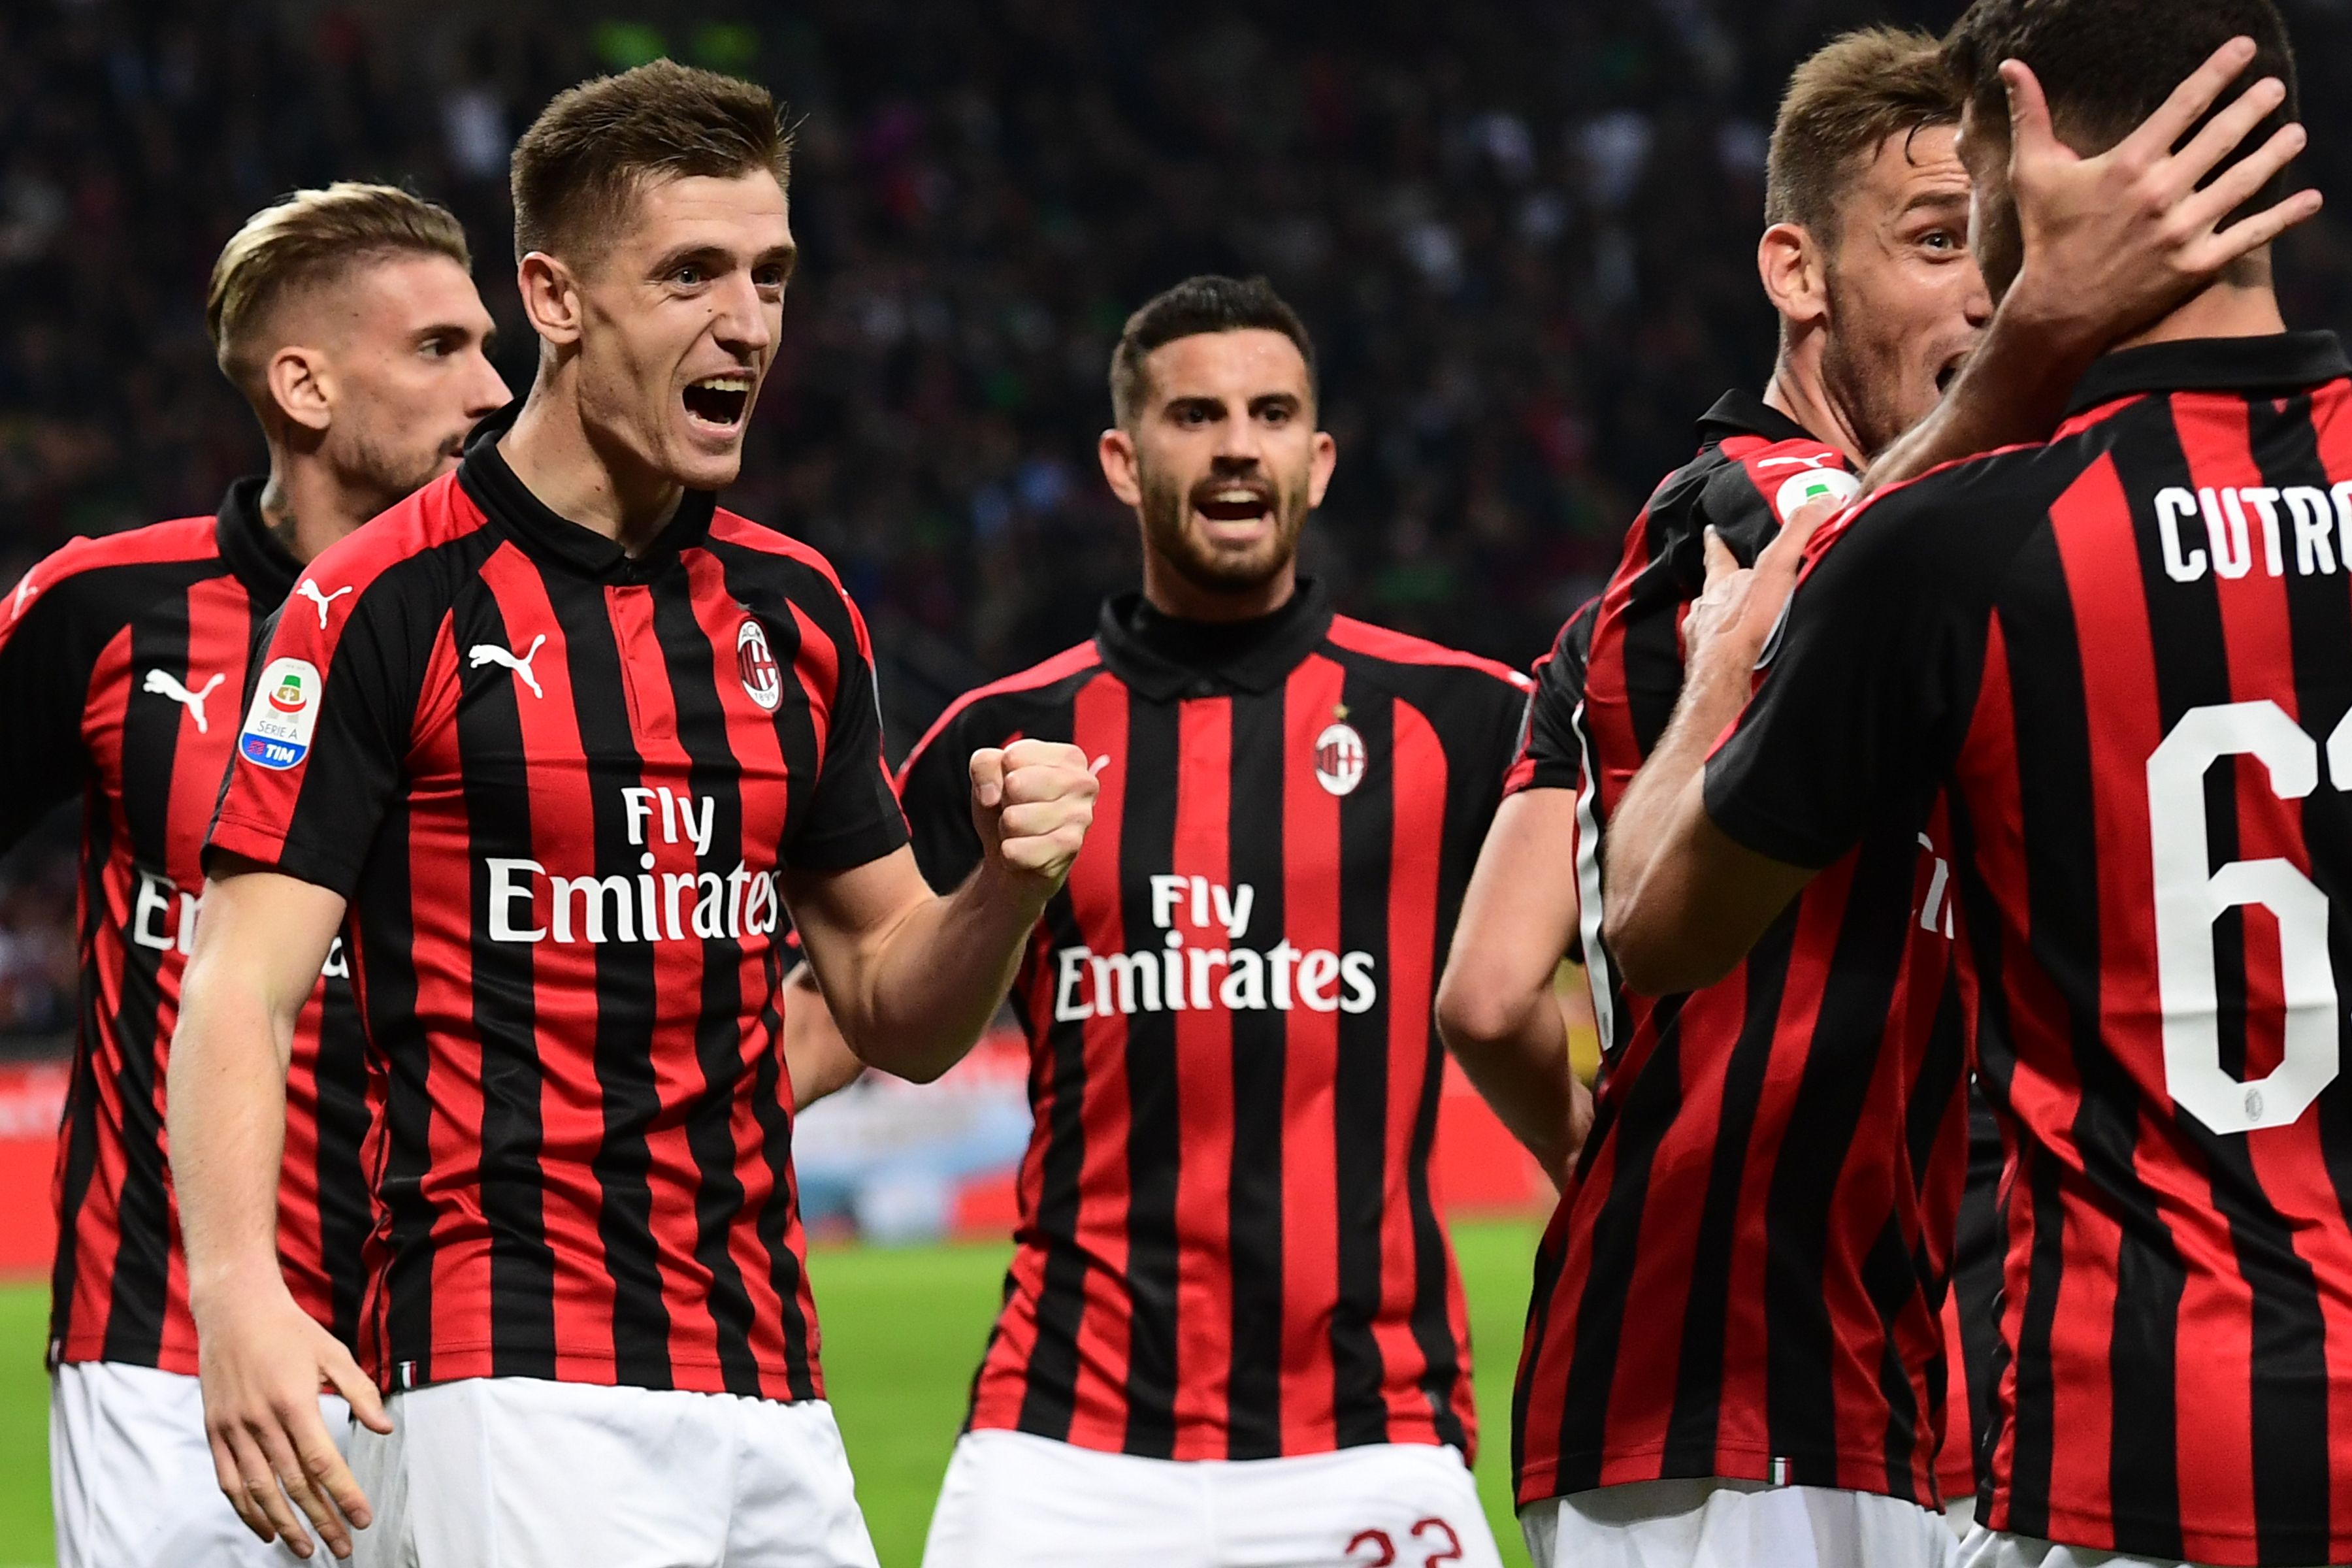 AC Milan's Polish forward Krzysztof Piatek (L) celebrates with teammates after opening the scoring during the Italian Serie A football march AC Milan vs Udinese on April 2, 2019 at the San Siro stadium in Milan. (Photo by Miguel MEDINA / AFP) (Photo credit should read MIGUEL MEDINA/AFP/Getty Images)